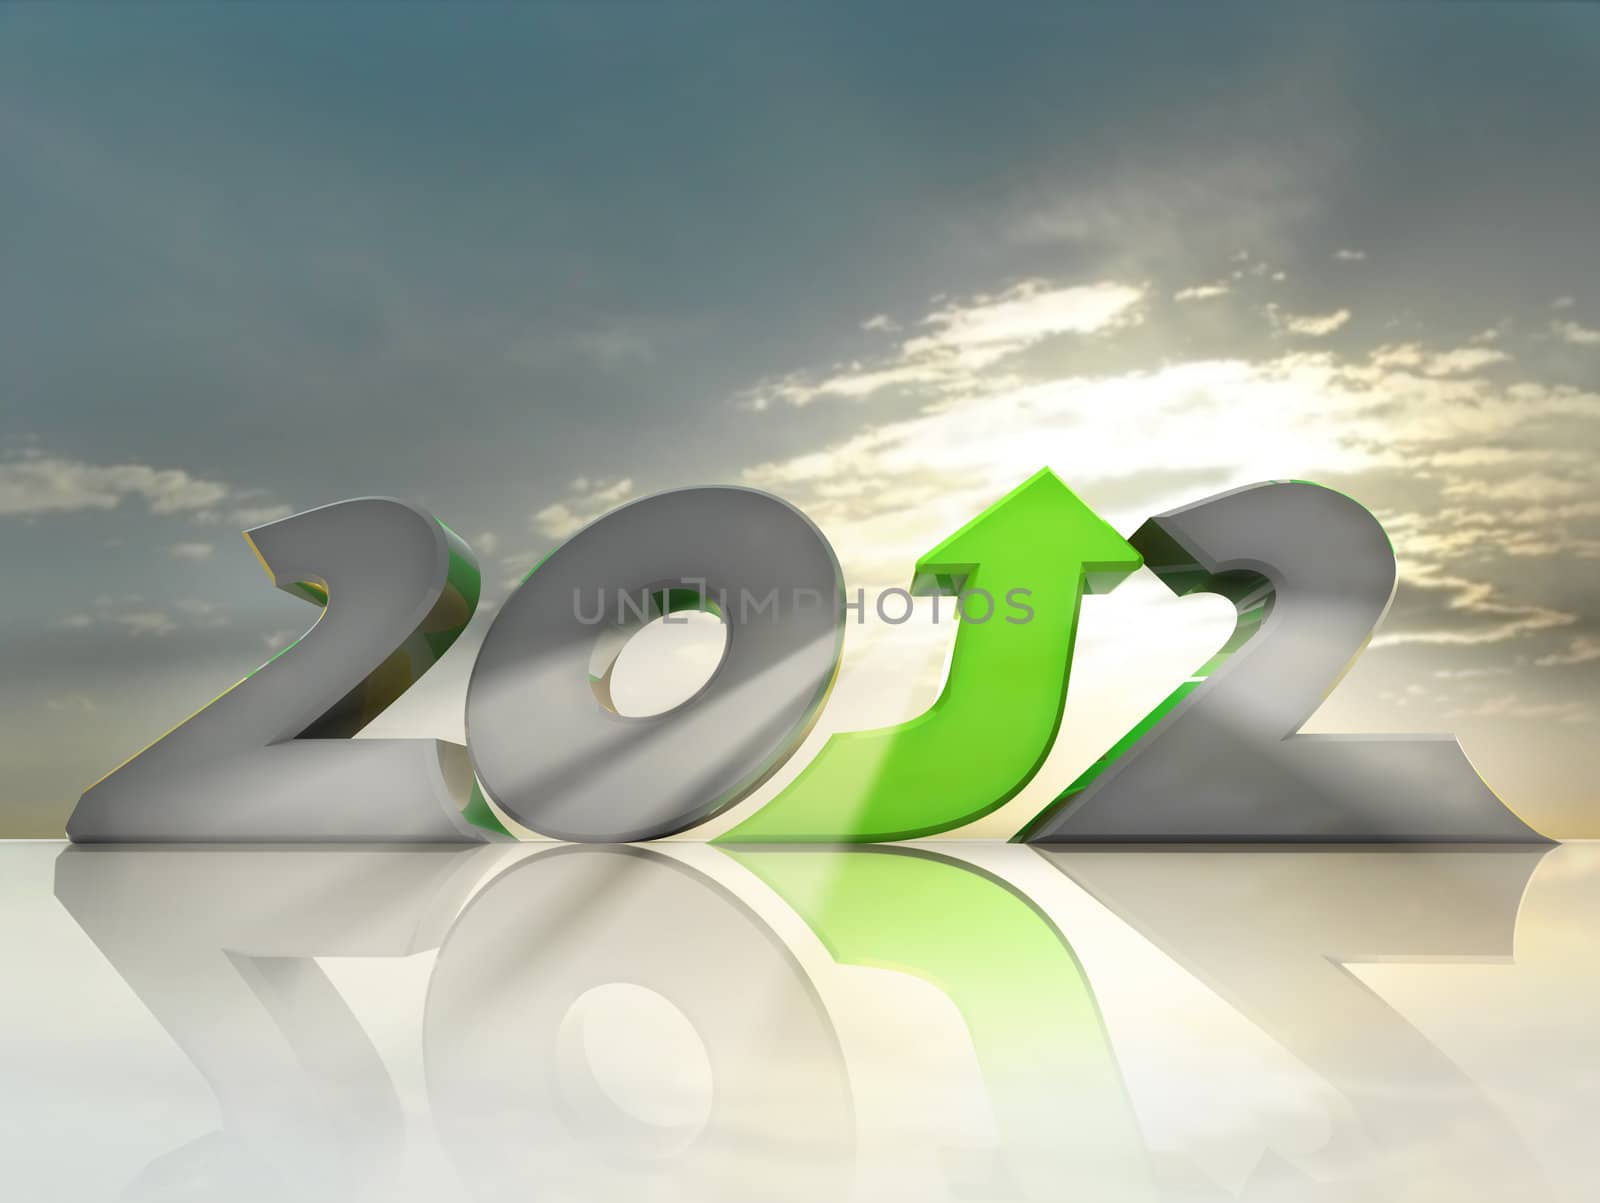 Business growth in 2012. Message of hope and prosperity